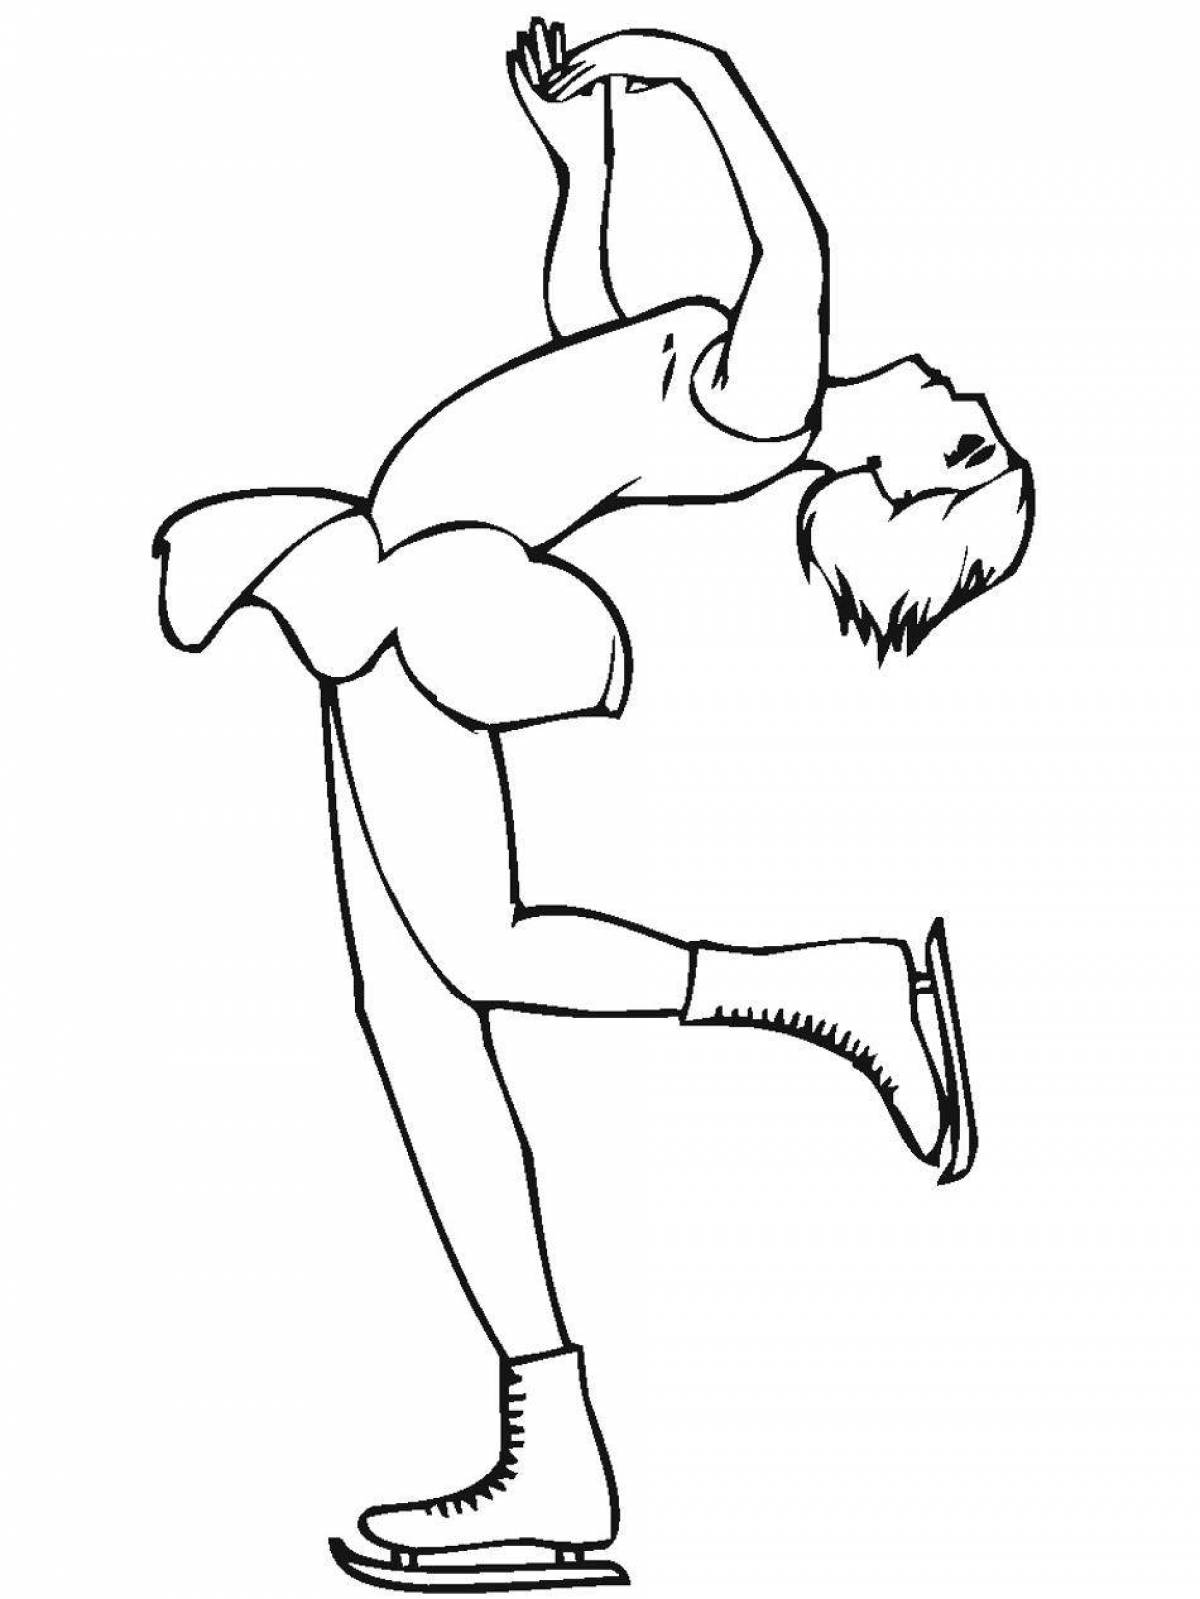 Coloring page energetic skater